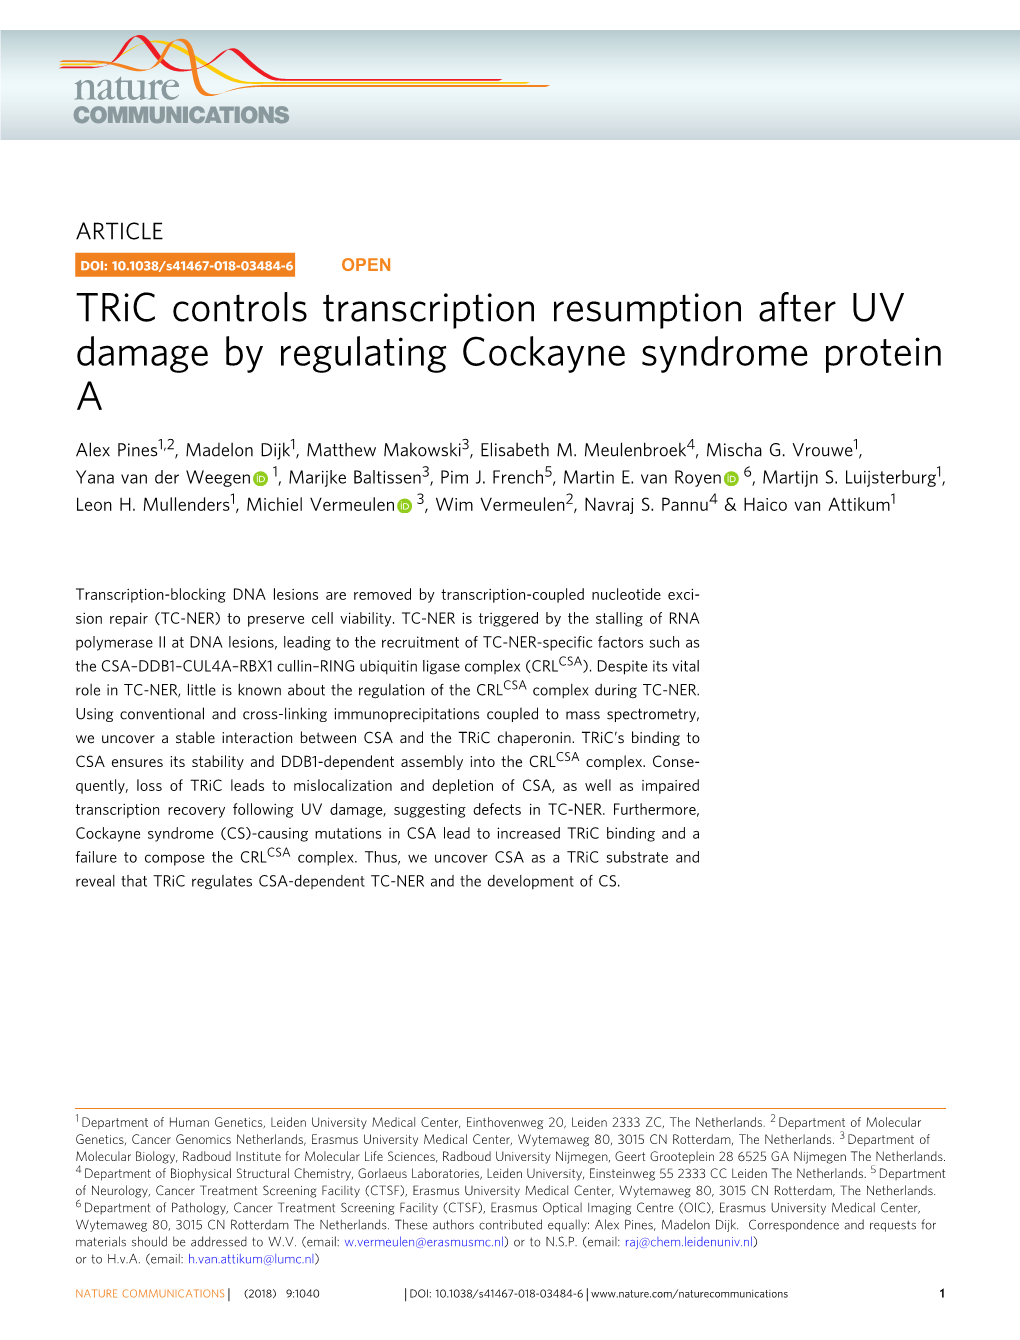 Tric Controls Transcription Resumption After UV Damage by Regulating Cockayne Syndrome Protein A